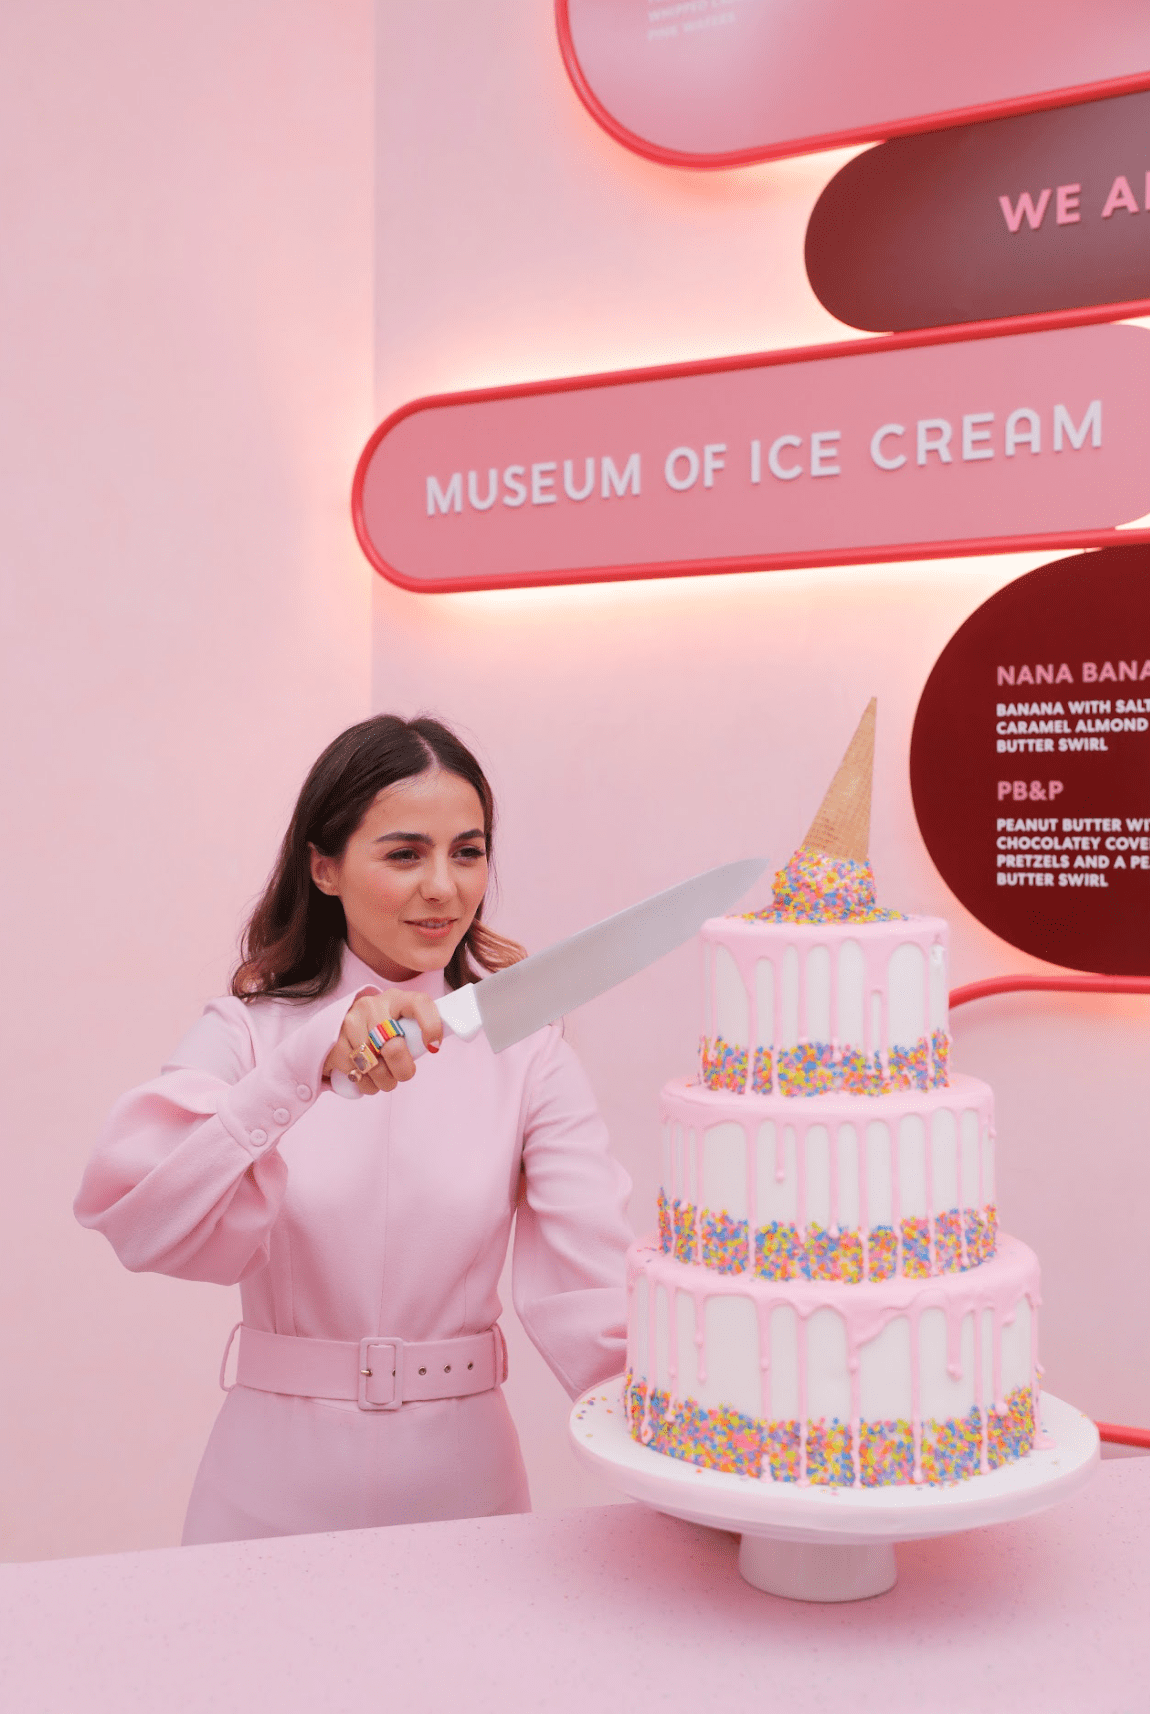 Birthday party guests cutting their cake in MUSEUM OF ICE CREAM's private event space